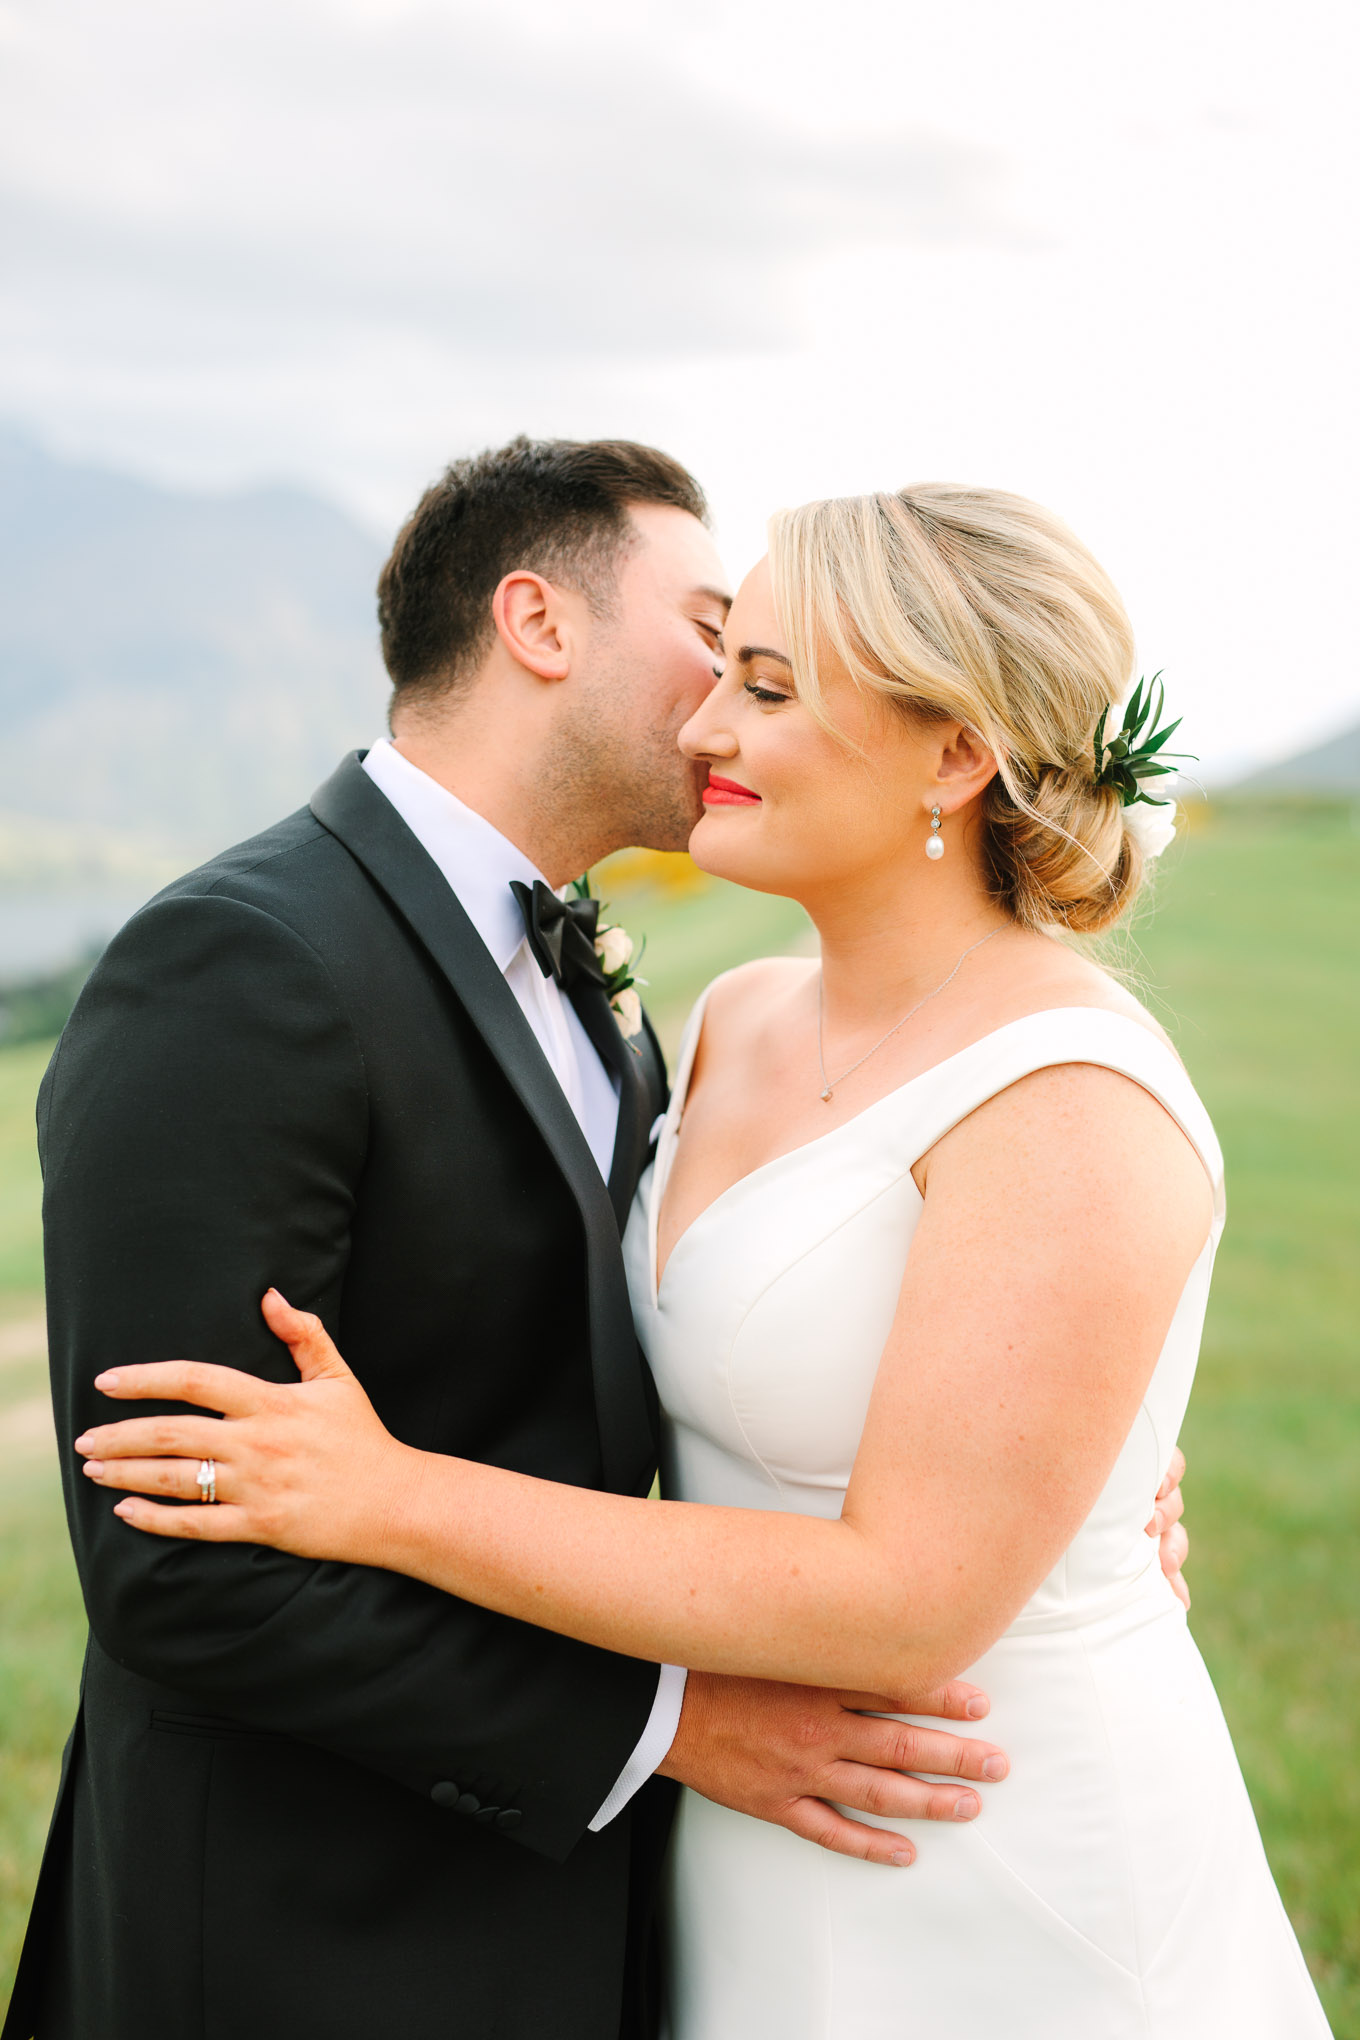 Groom and bride embracing. Millbrook Resort Queenstown New Zealand wedding by Mary Costa Photography | www.marycostaweddings.com